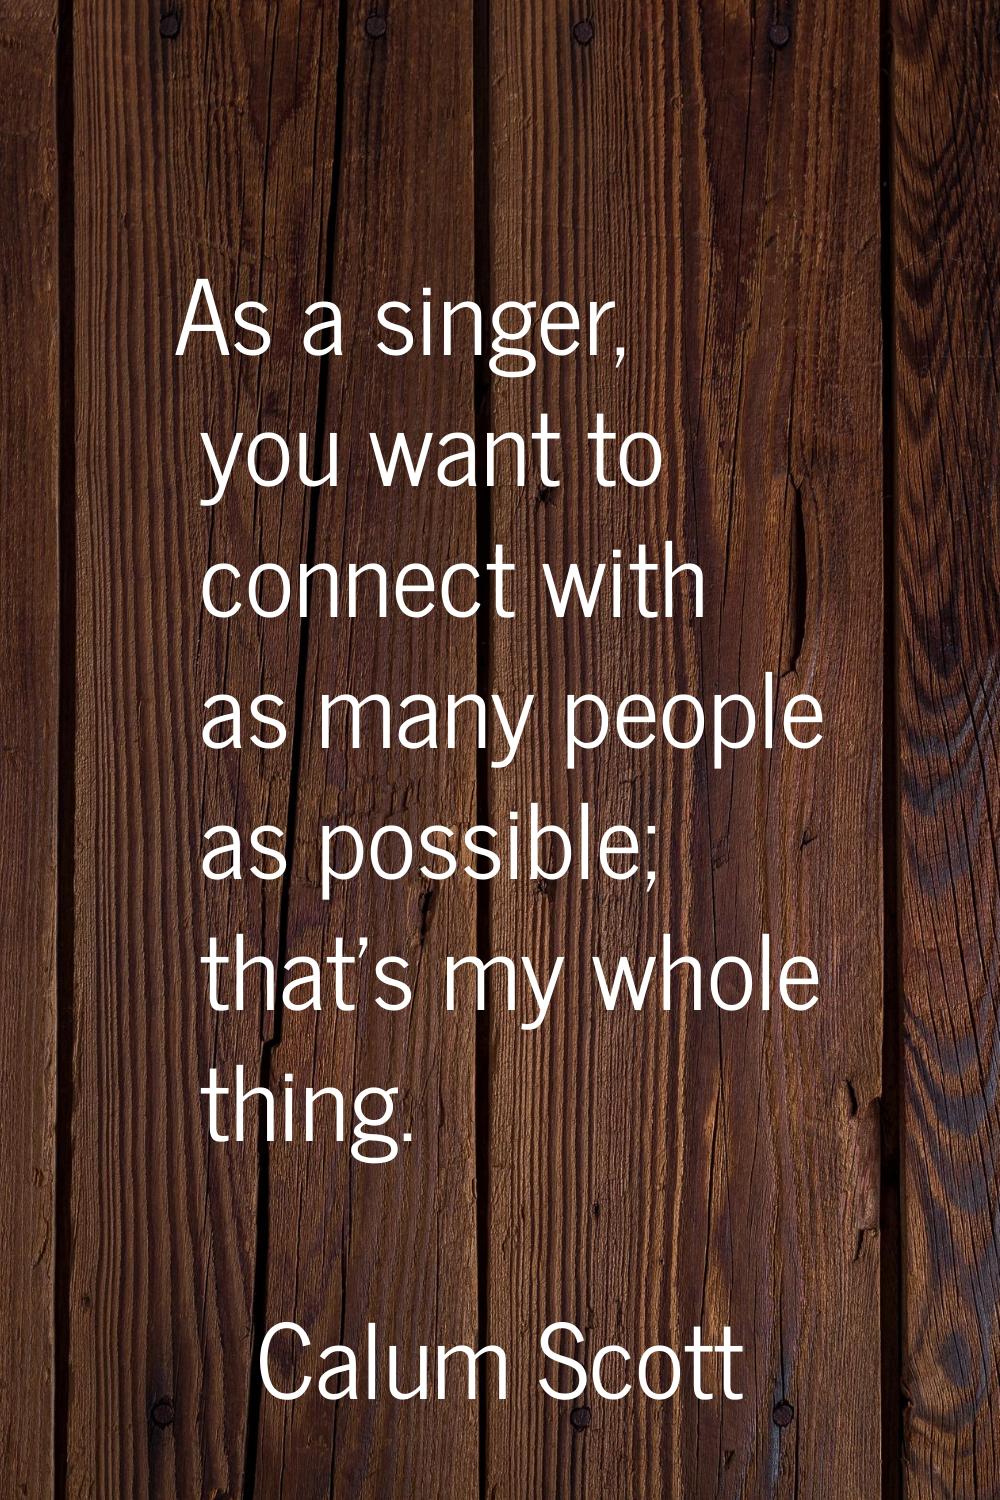 As a singer, you want to connect with as many people as possible; that's my whole thing.